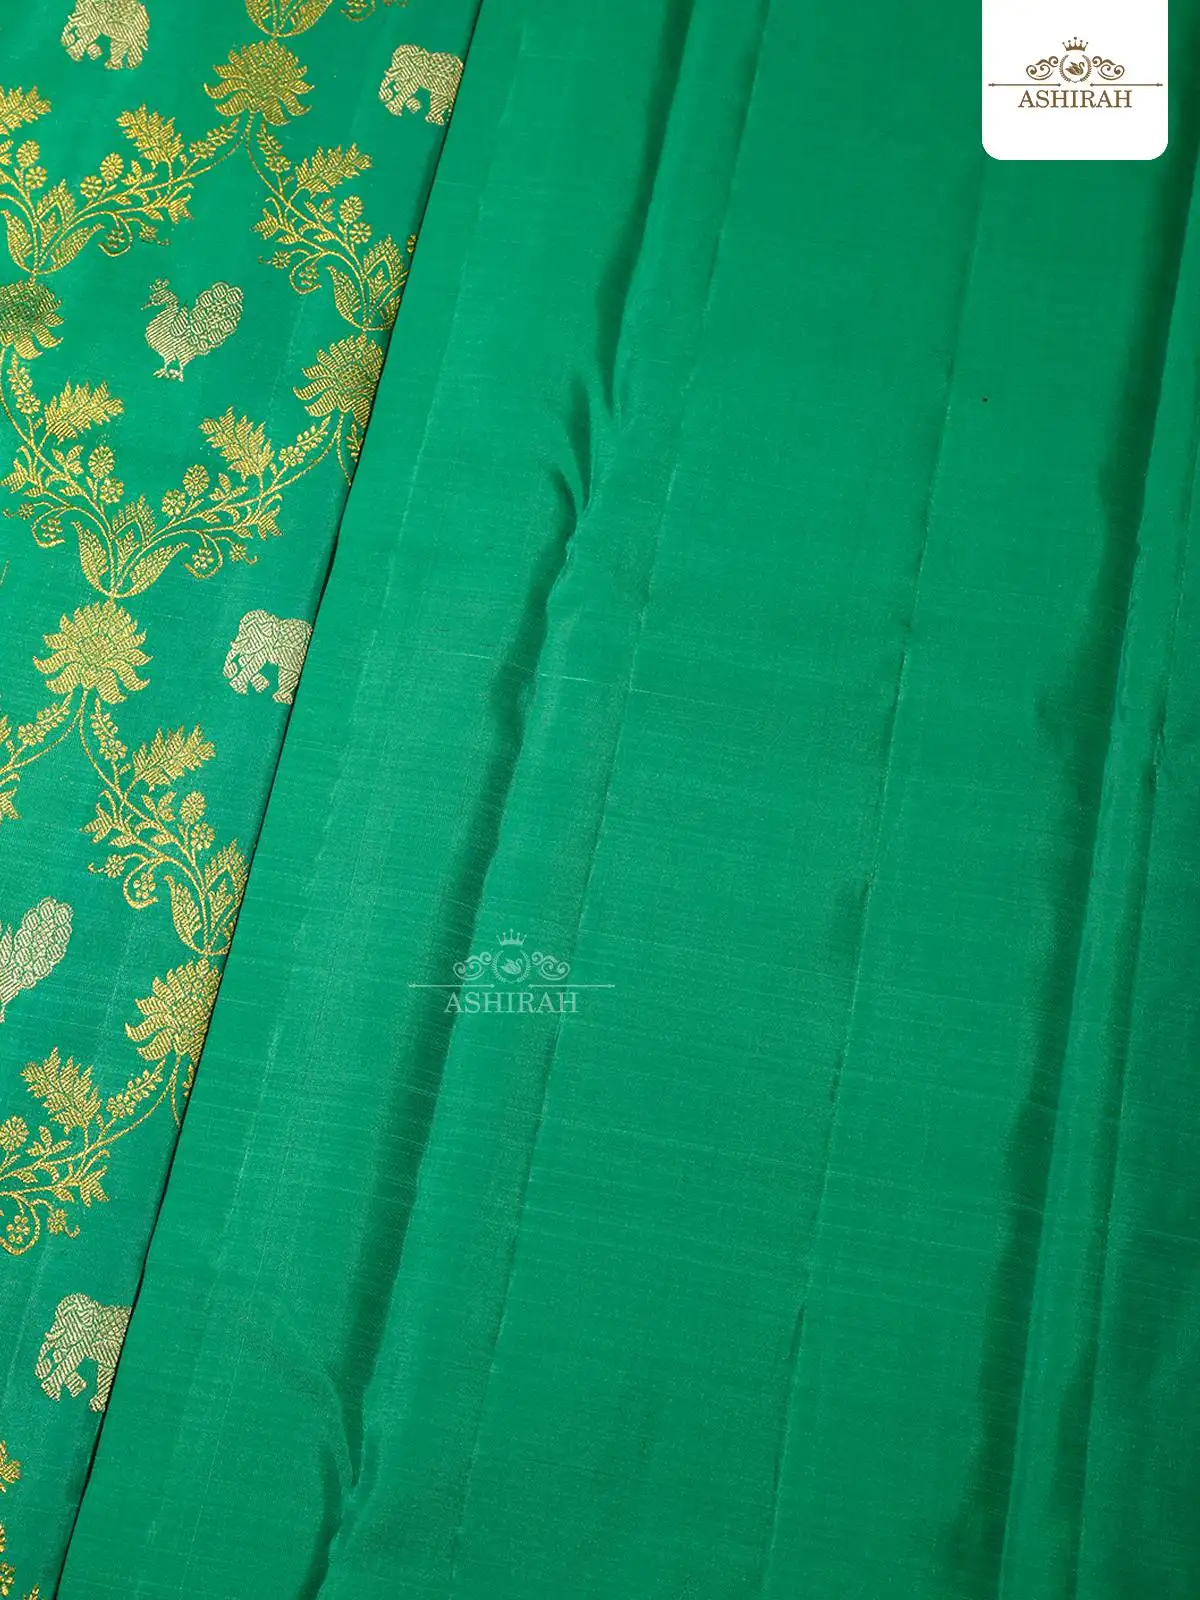 Peacock Green Pure Kanchipuram Silk Saree With Flower And Animal Motifs On The Body And Zari Border